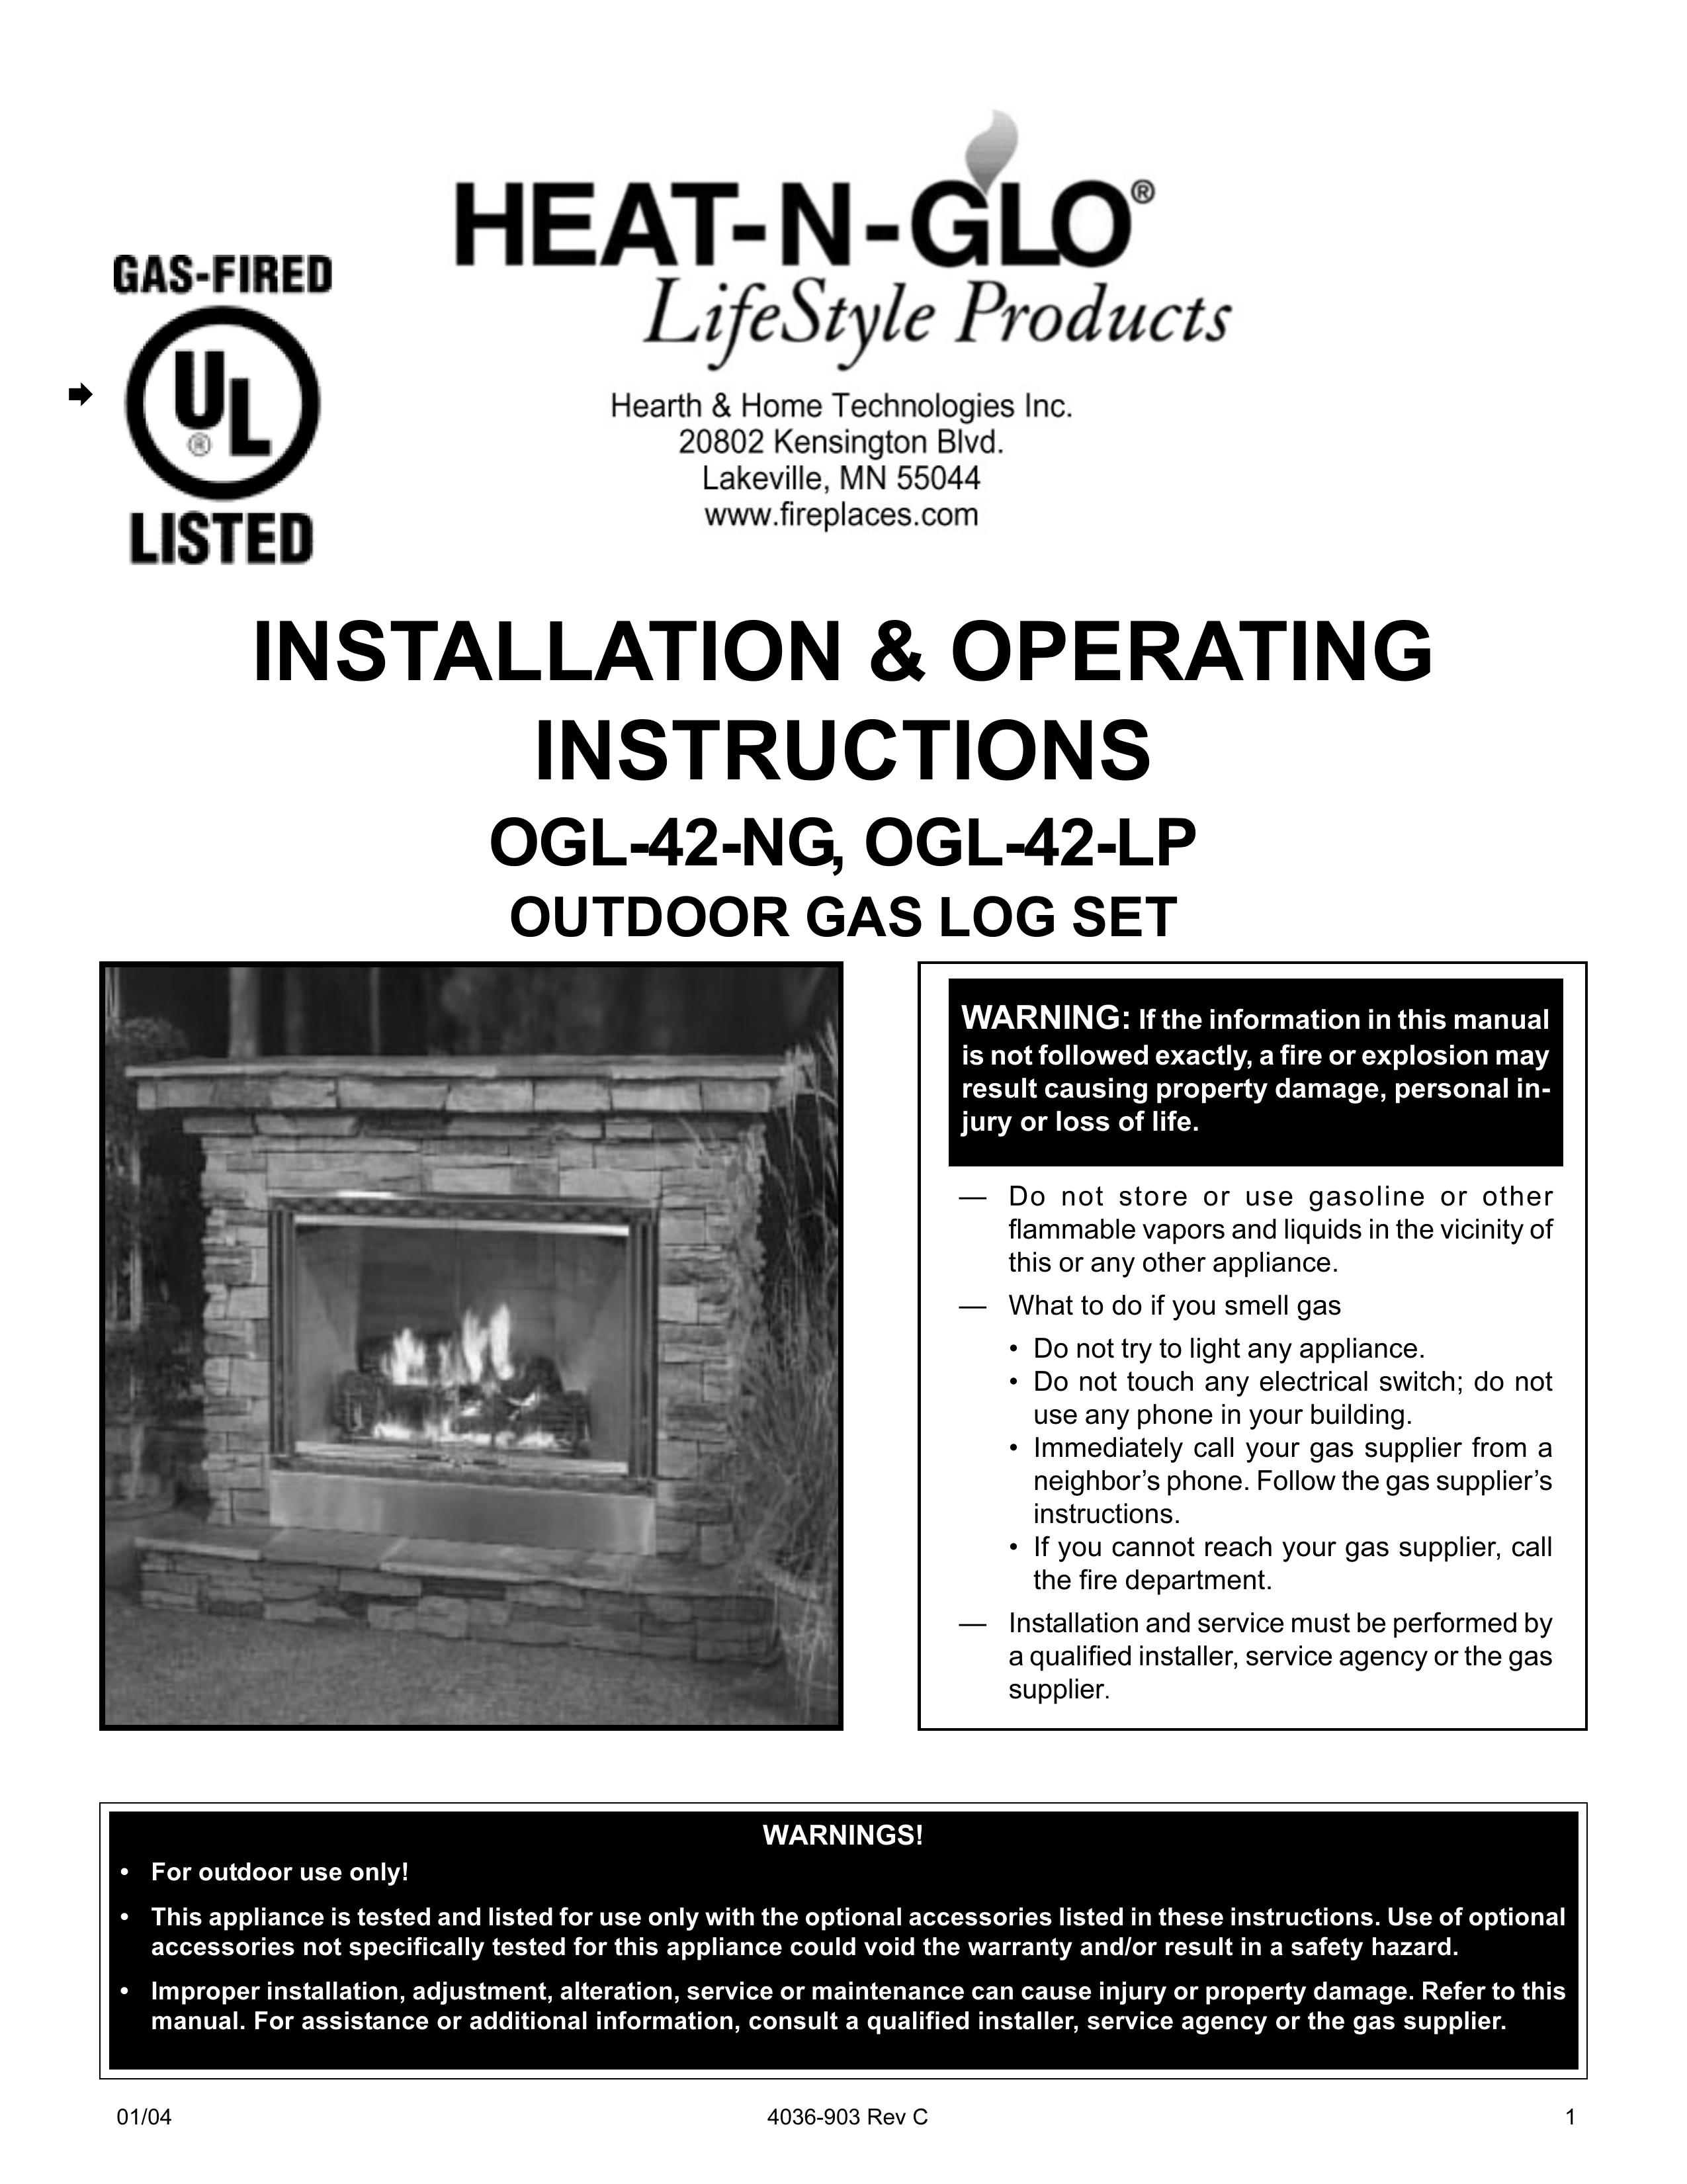 Heat & Glo LifeStyle OGL-42 Outdoor Fireplace User Manual